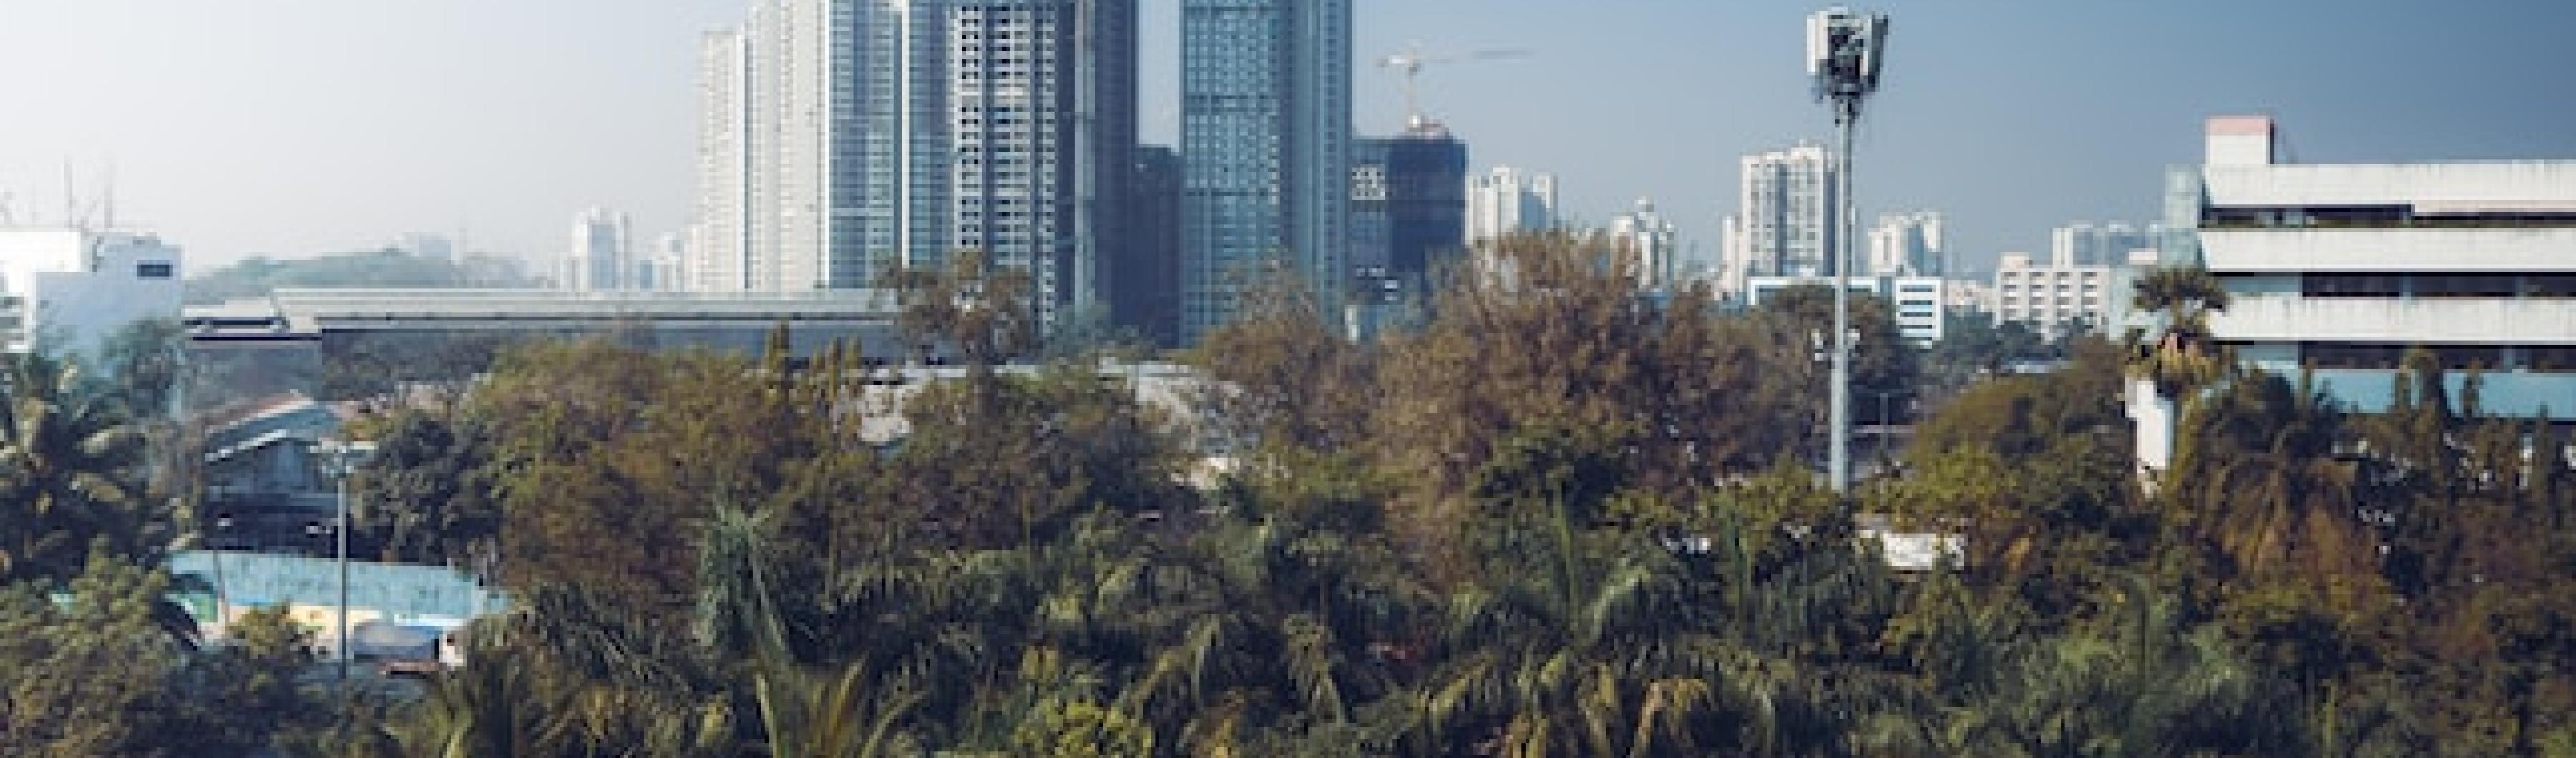 a view of a city skyline with greenery in the foreground